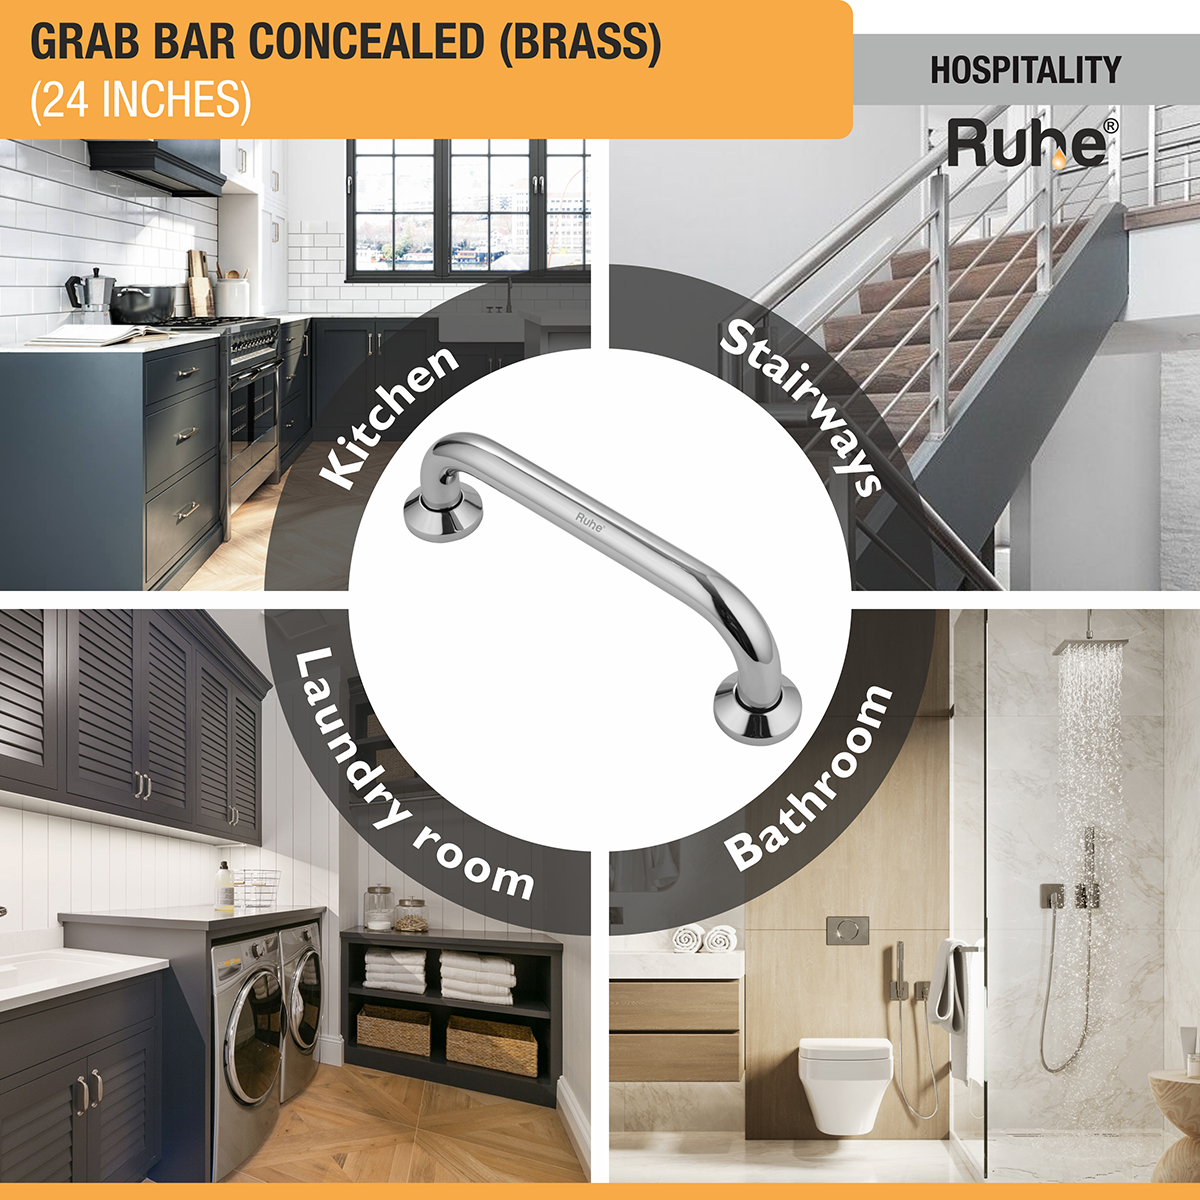 Brass Grab Bar Concealed (24 inches) for kitchen, bathroom, toilet, laundry room, washroom